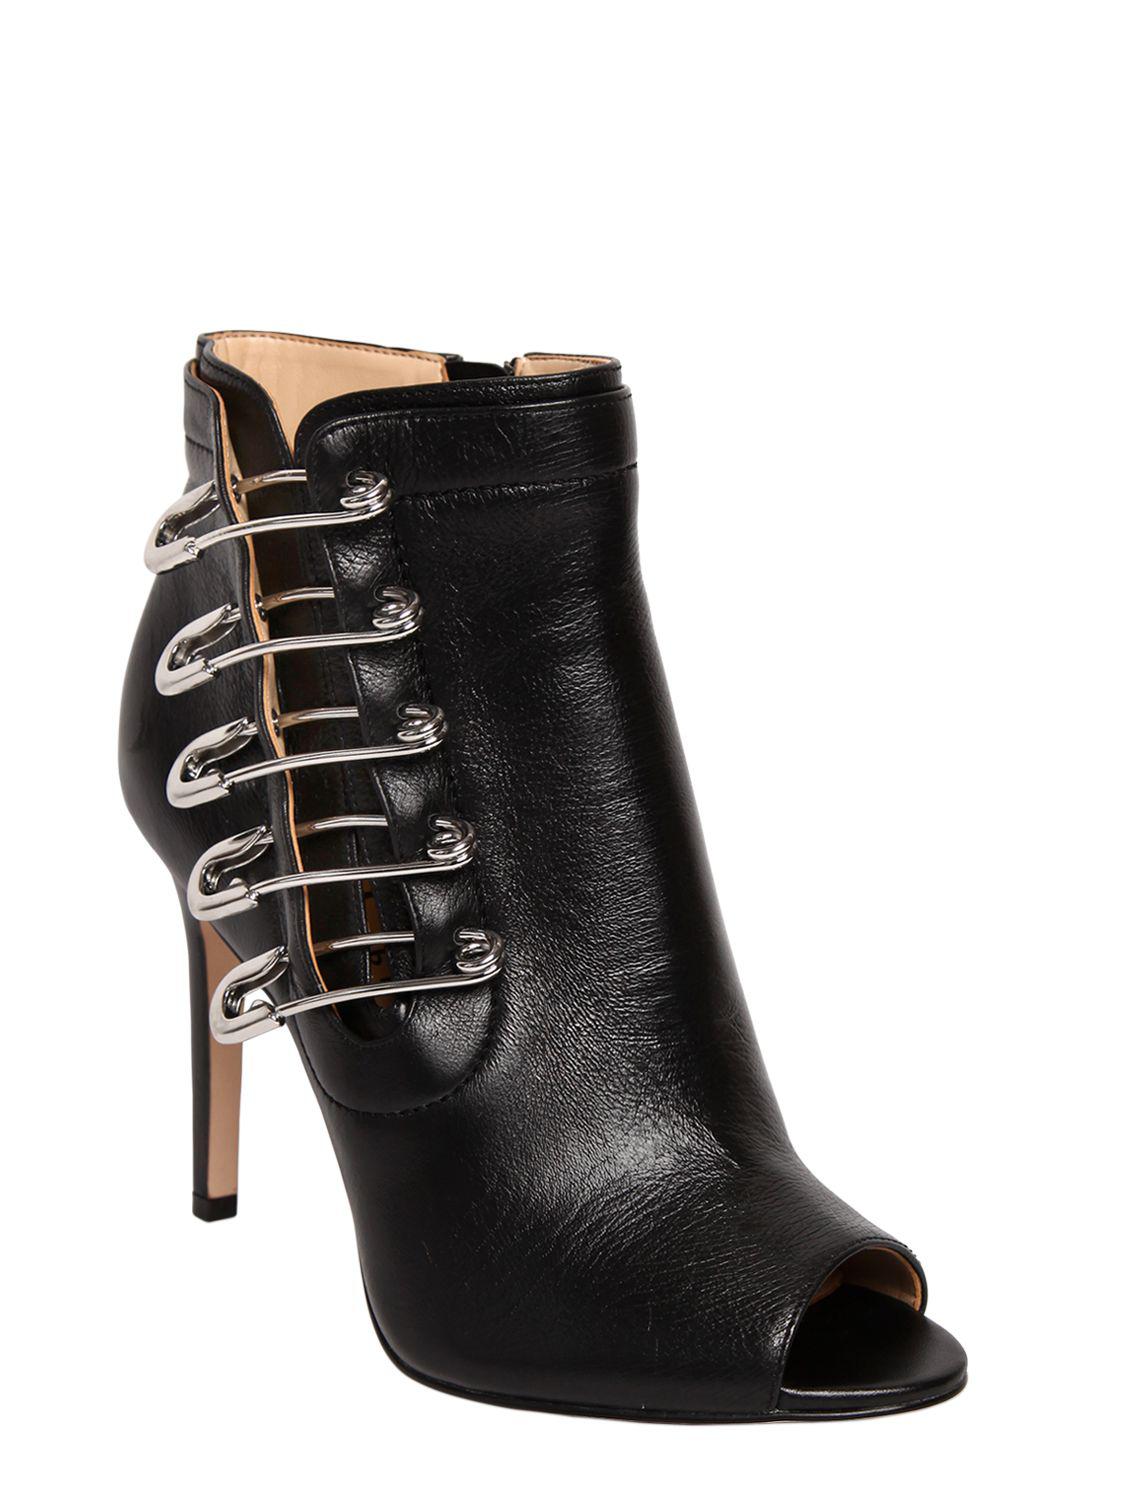 Katy Perry 100mm Unity Pins Leather Ankle Boots in Black - Lyst